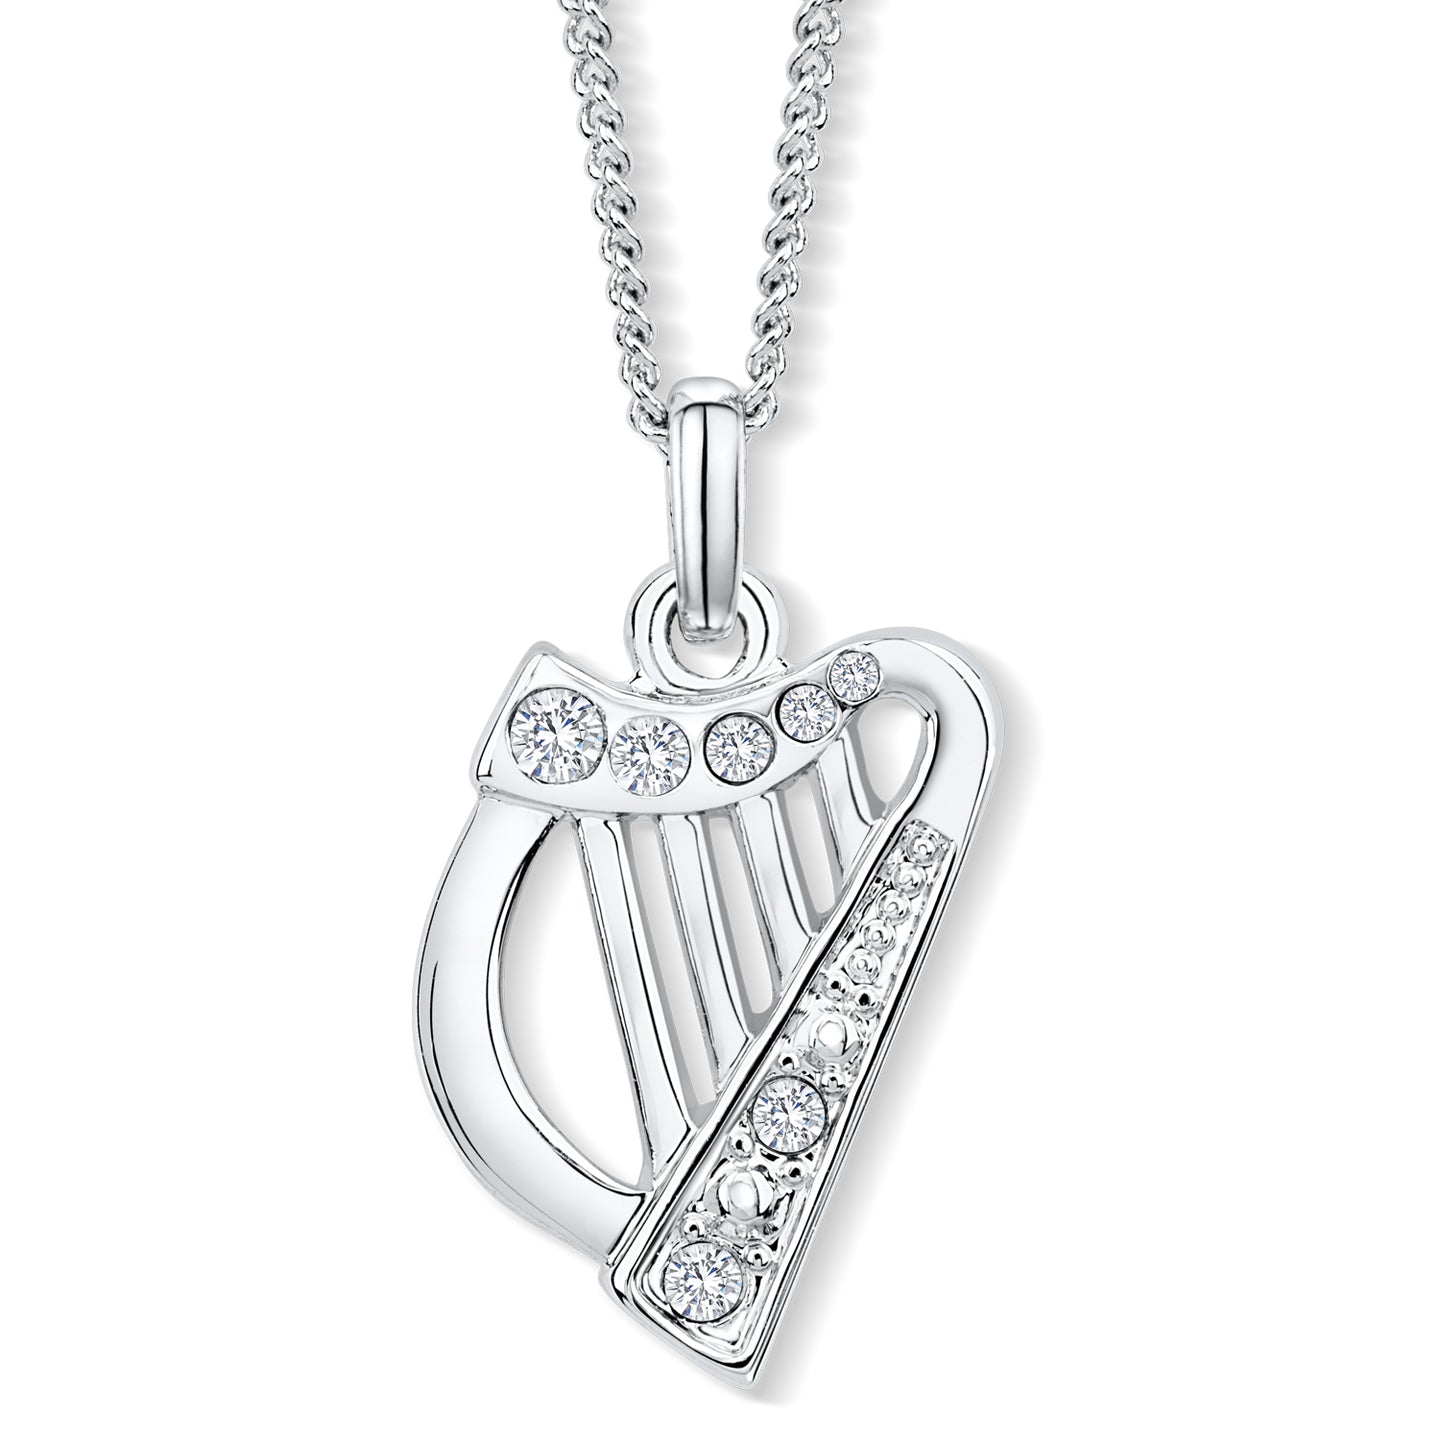 Harp Pendant with Clear Crystals